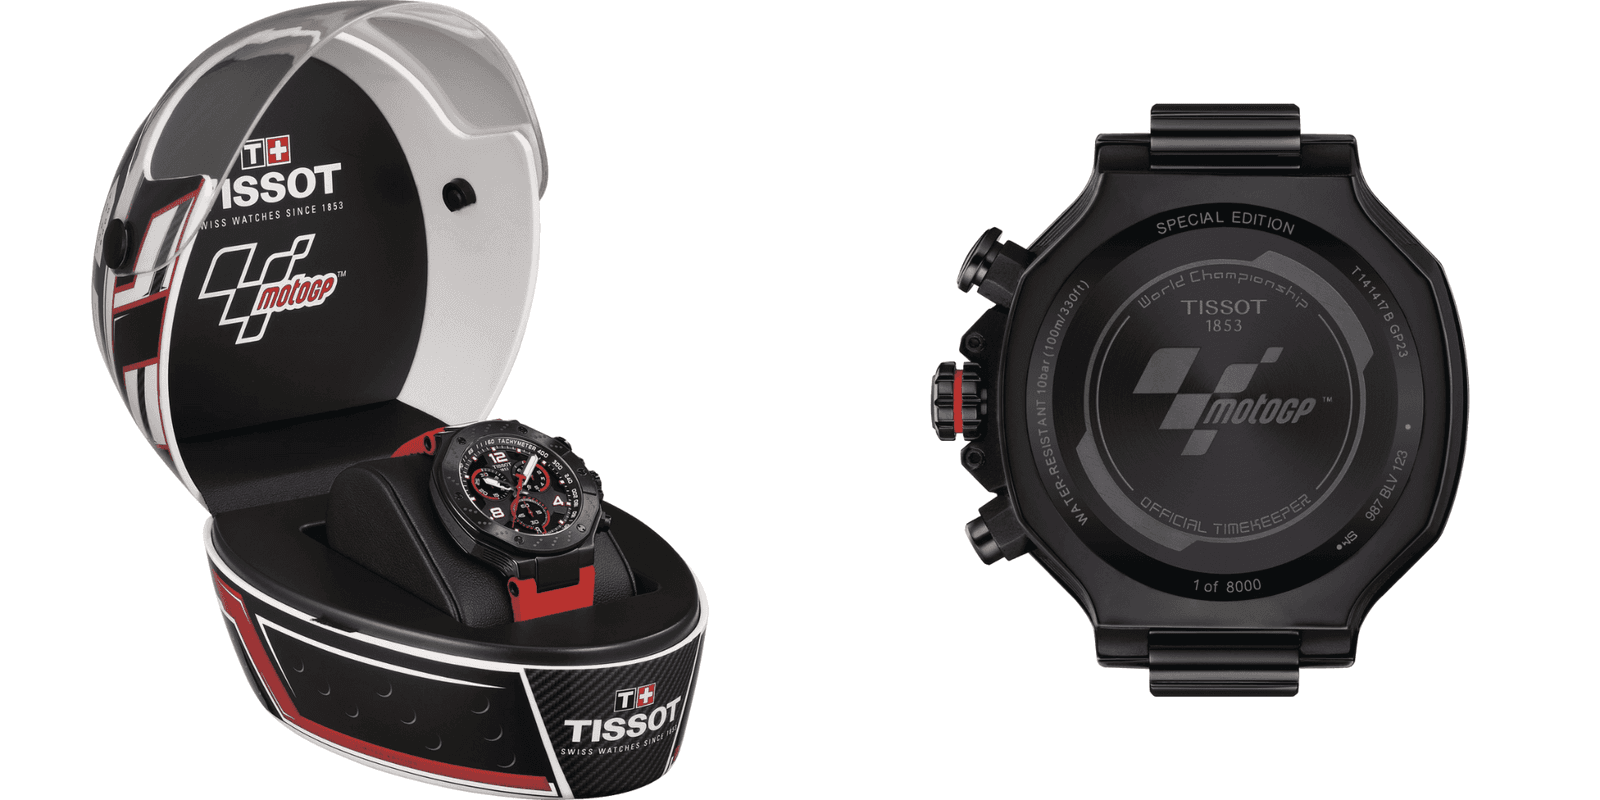 The dedicated watches come packaged in mini helmets and there is a MotoGP logo engraved on the case back